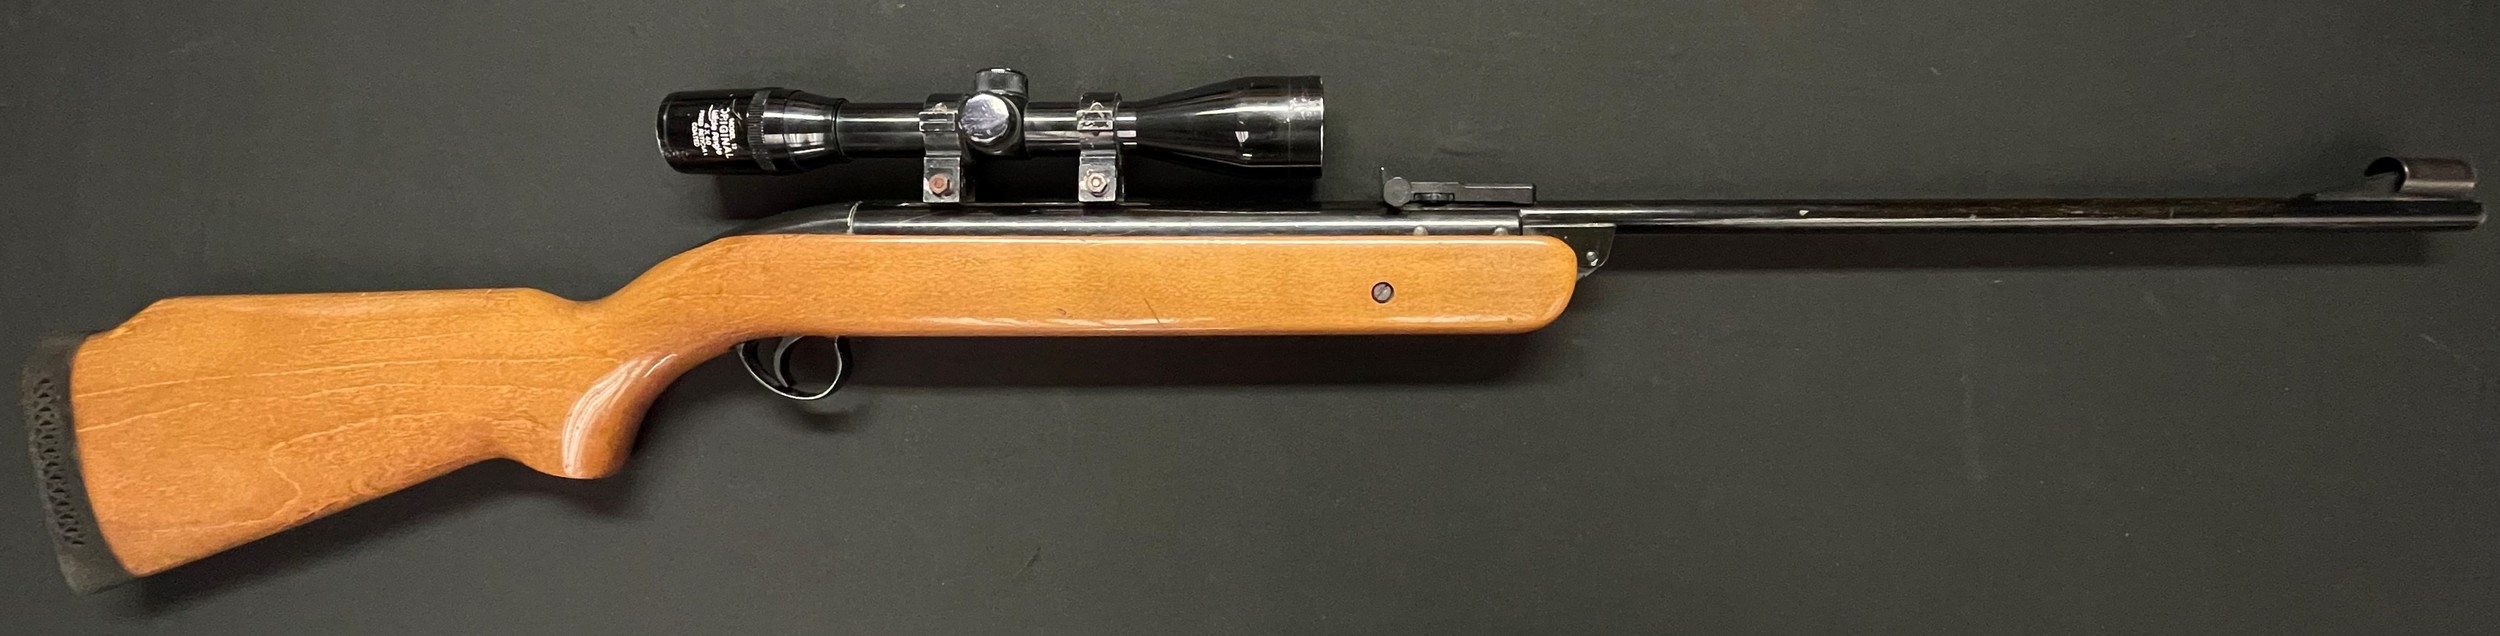 BSA Mercury Mark II .22 Air Rifle serial number ZA1468 with 470mm long barrel fitted with a Model 12 - Image 2 of 15